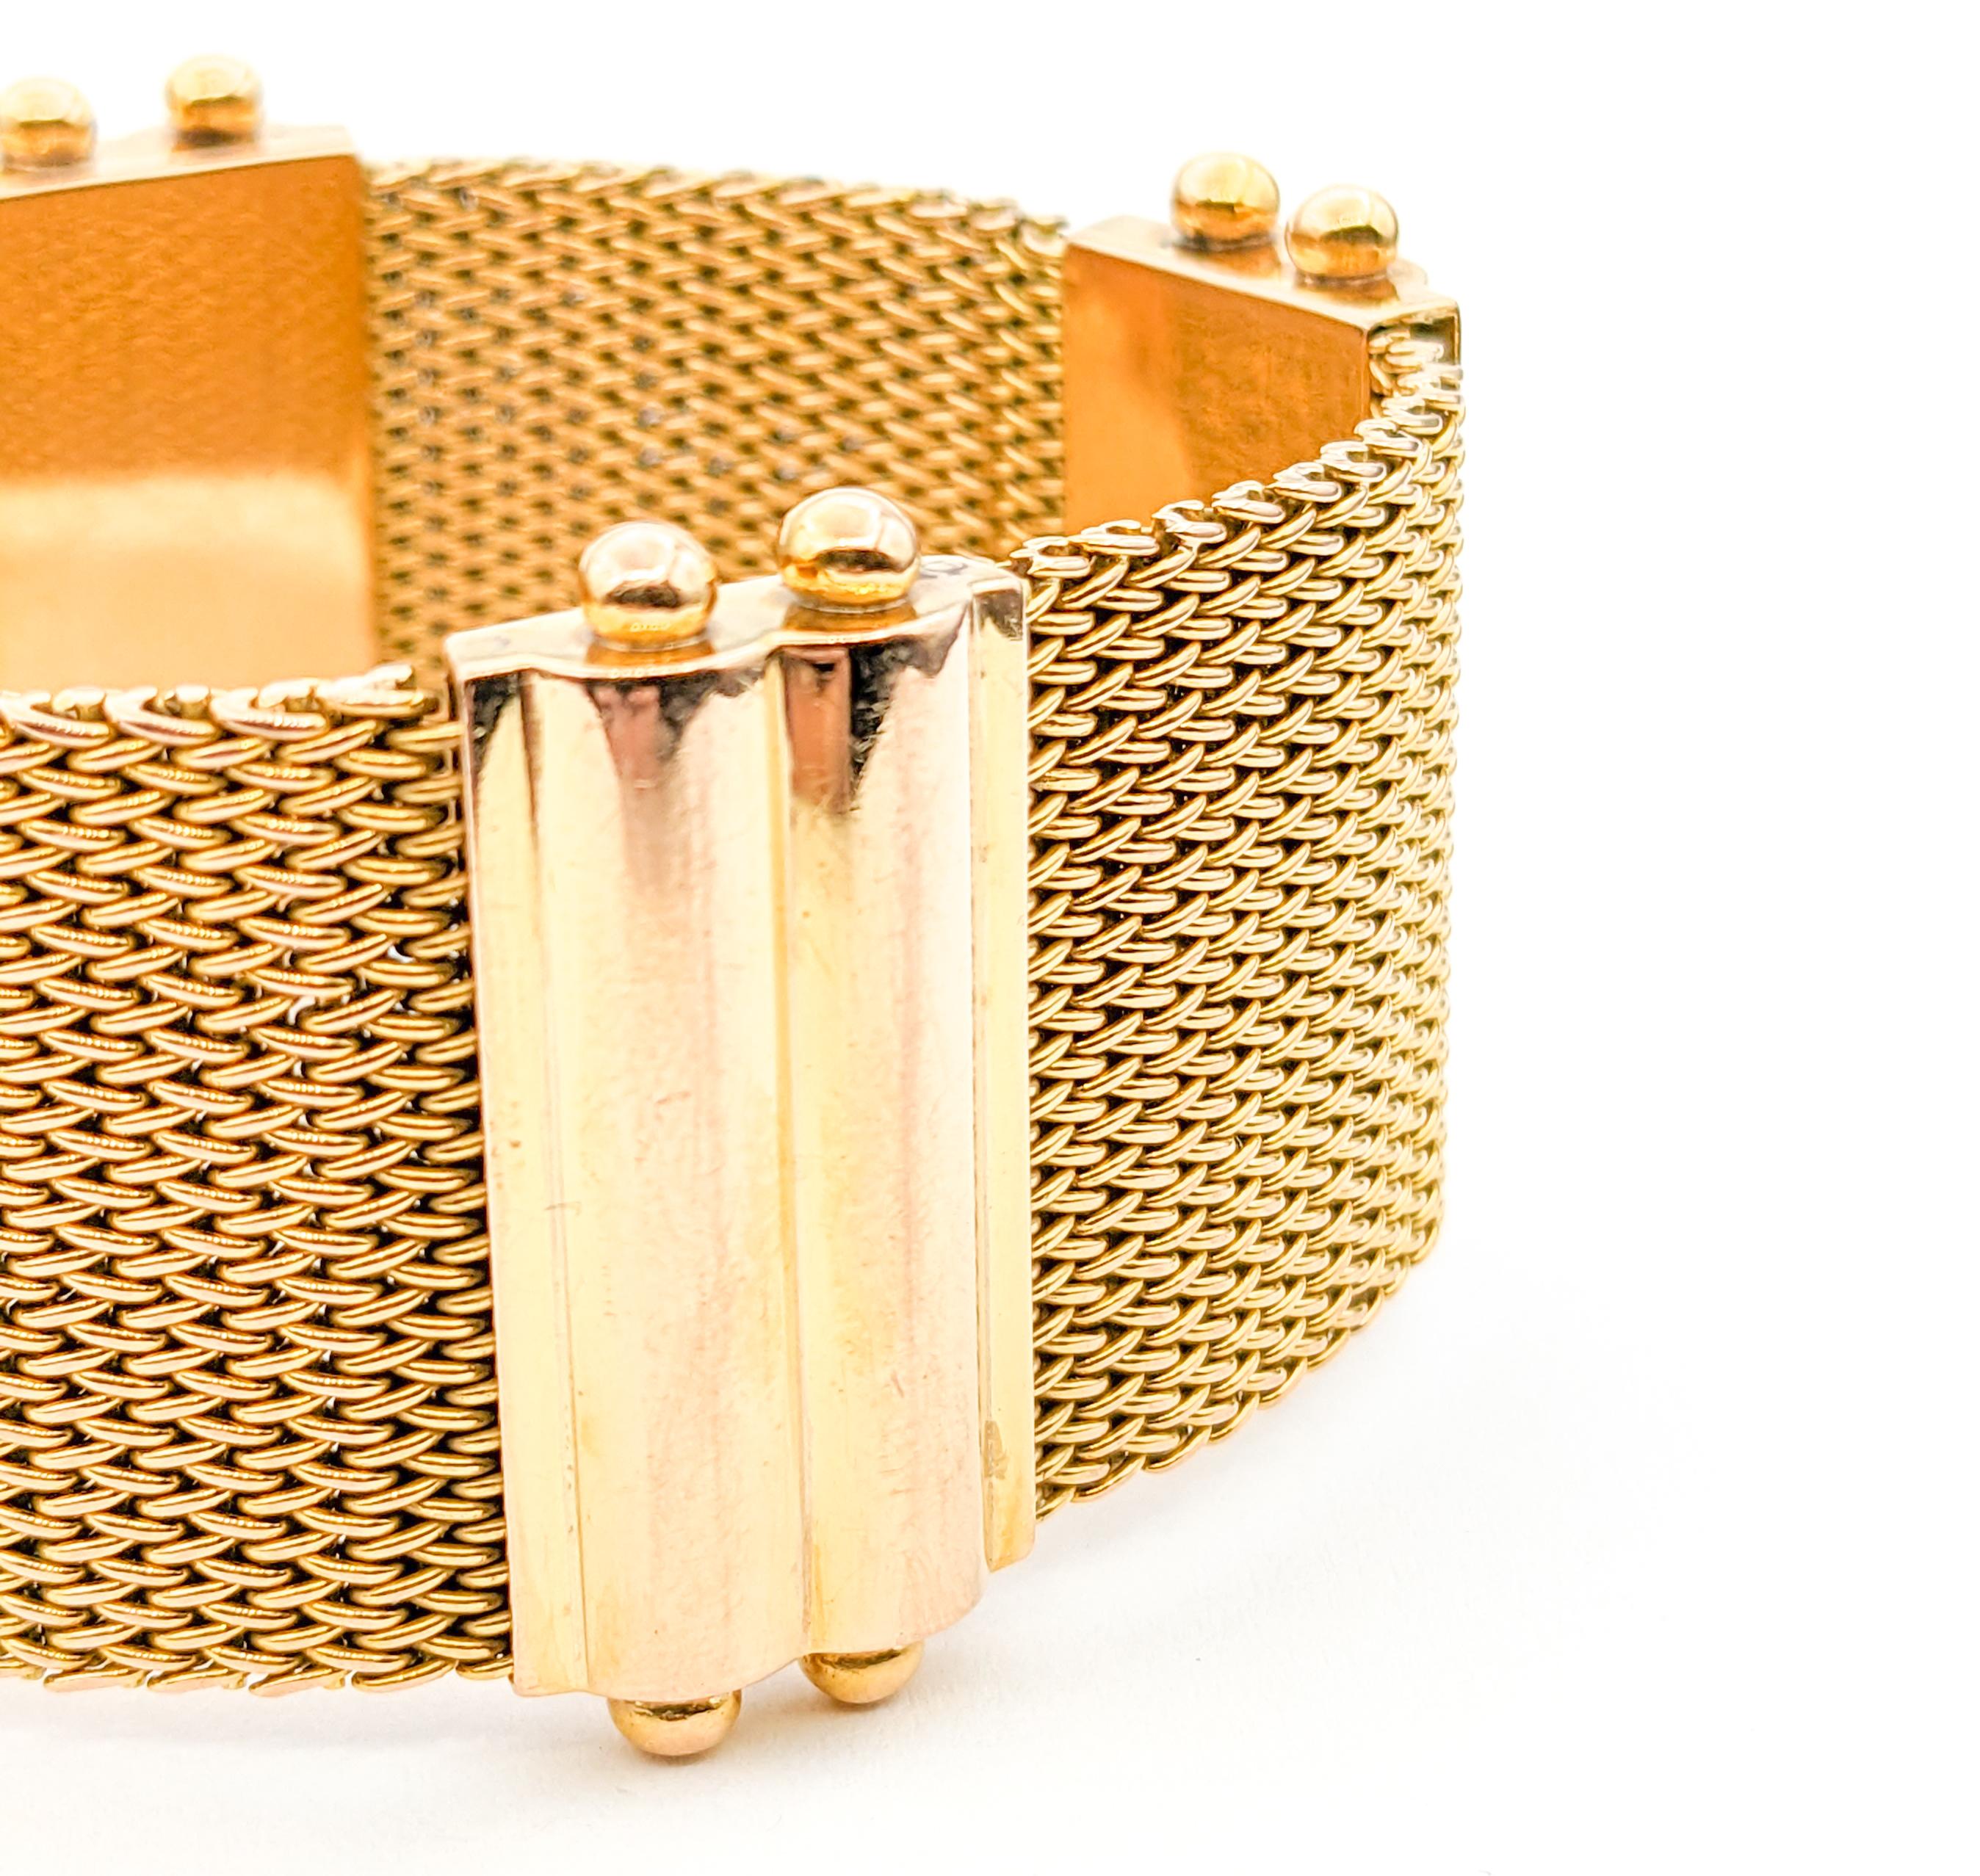 Antique Wide Mesh Bracelet In 18K Yellow Gold

Introducing a stunning Antique Bracelet, meticulously crafted from bright 18k Yellow gold. This bracelet showcases a timeless, Turn of the Century Mesh Link design, a testament to the intricate artistry